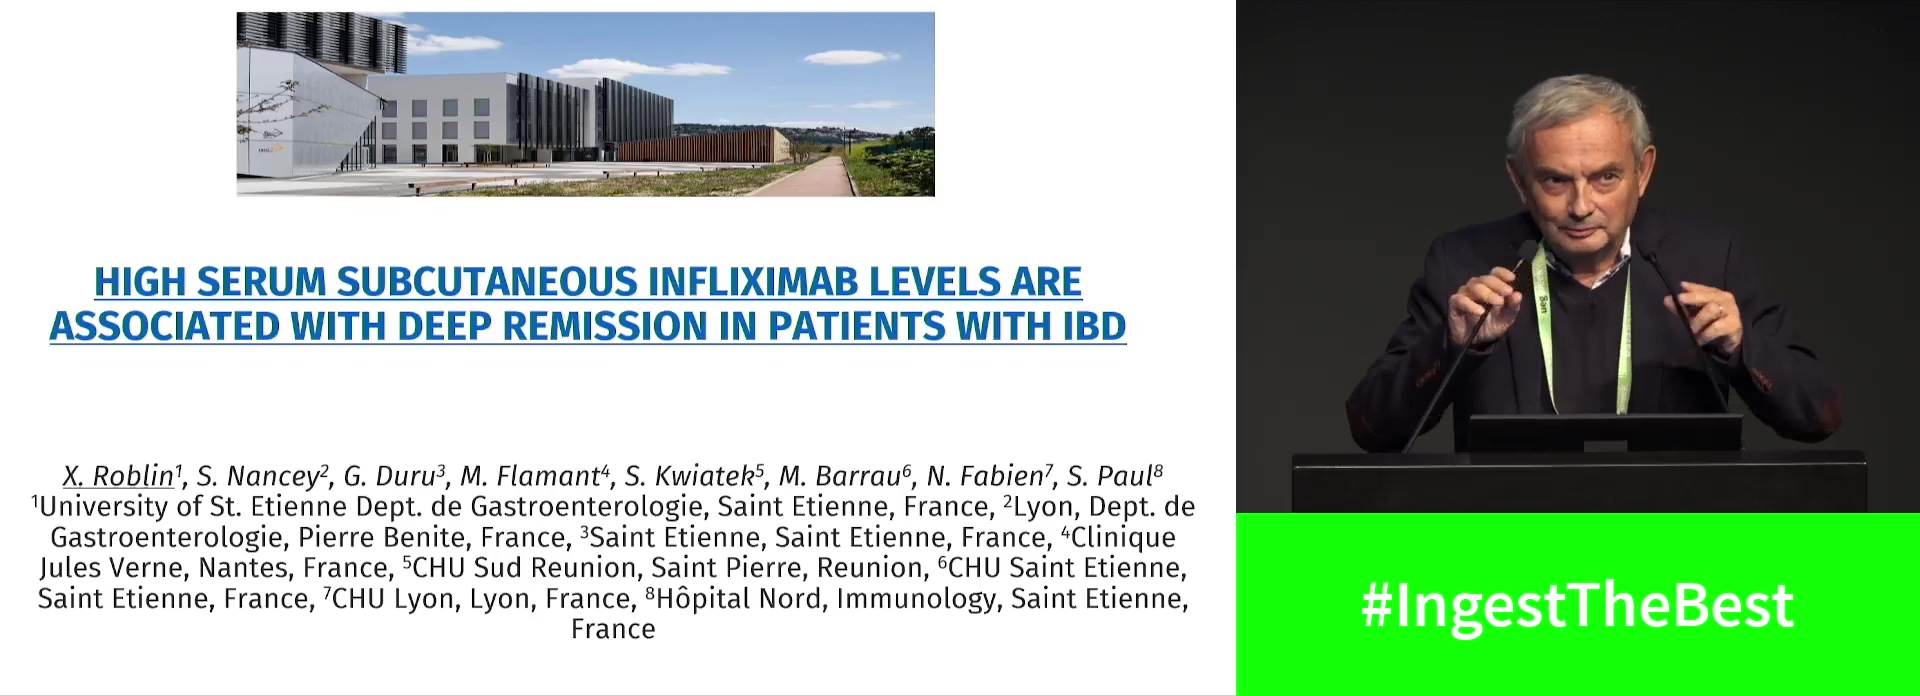 HIGH SERUM SUBCUTANEOUS INFLIXIMAB LEVELS ARE ASSOCIATED WITH DEEP REMISSION IN PATIENTS WITH IBD